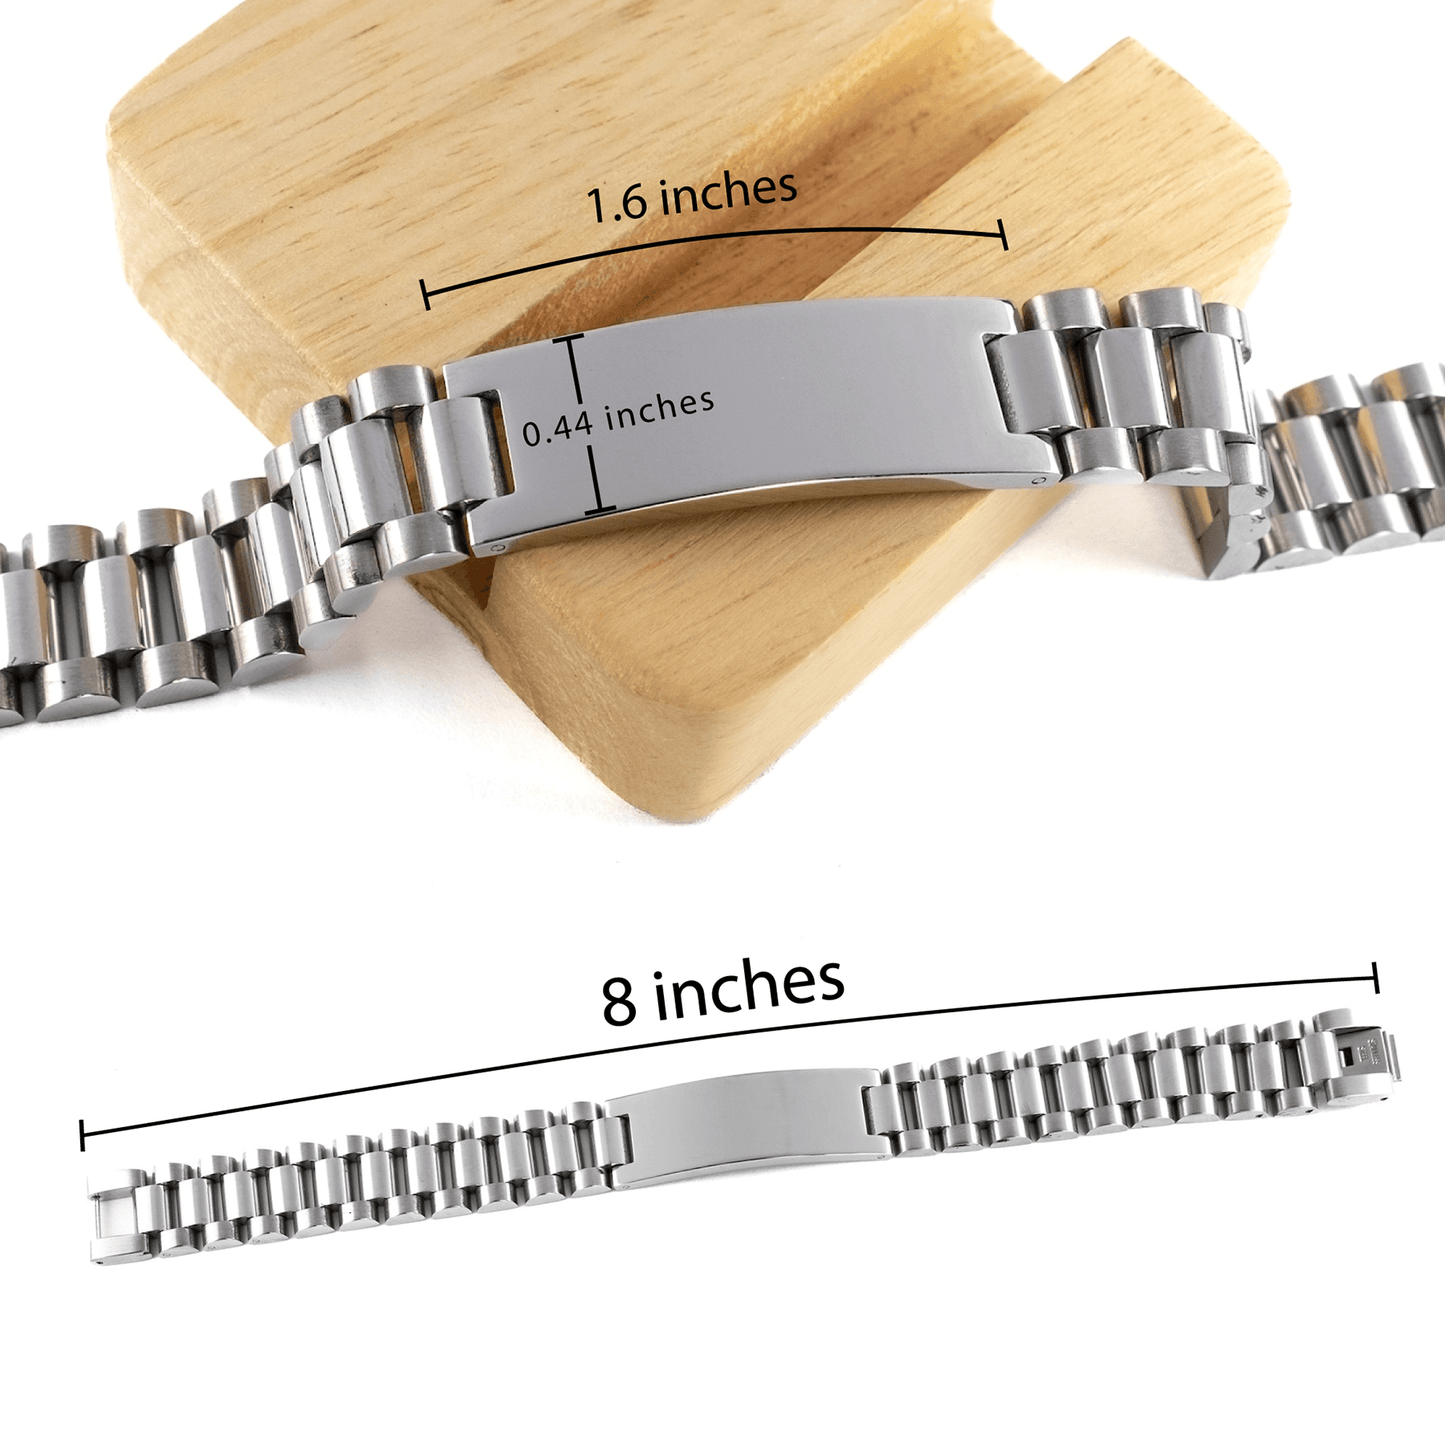 Childcare Worker Ladder Stainless Steel Engraved Bracelet - Thanks for being who you are - Birthday Christmas Jewelry Gifts Coworkers Colleague Boss - Mallard Moon Gift Shop